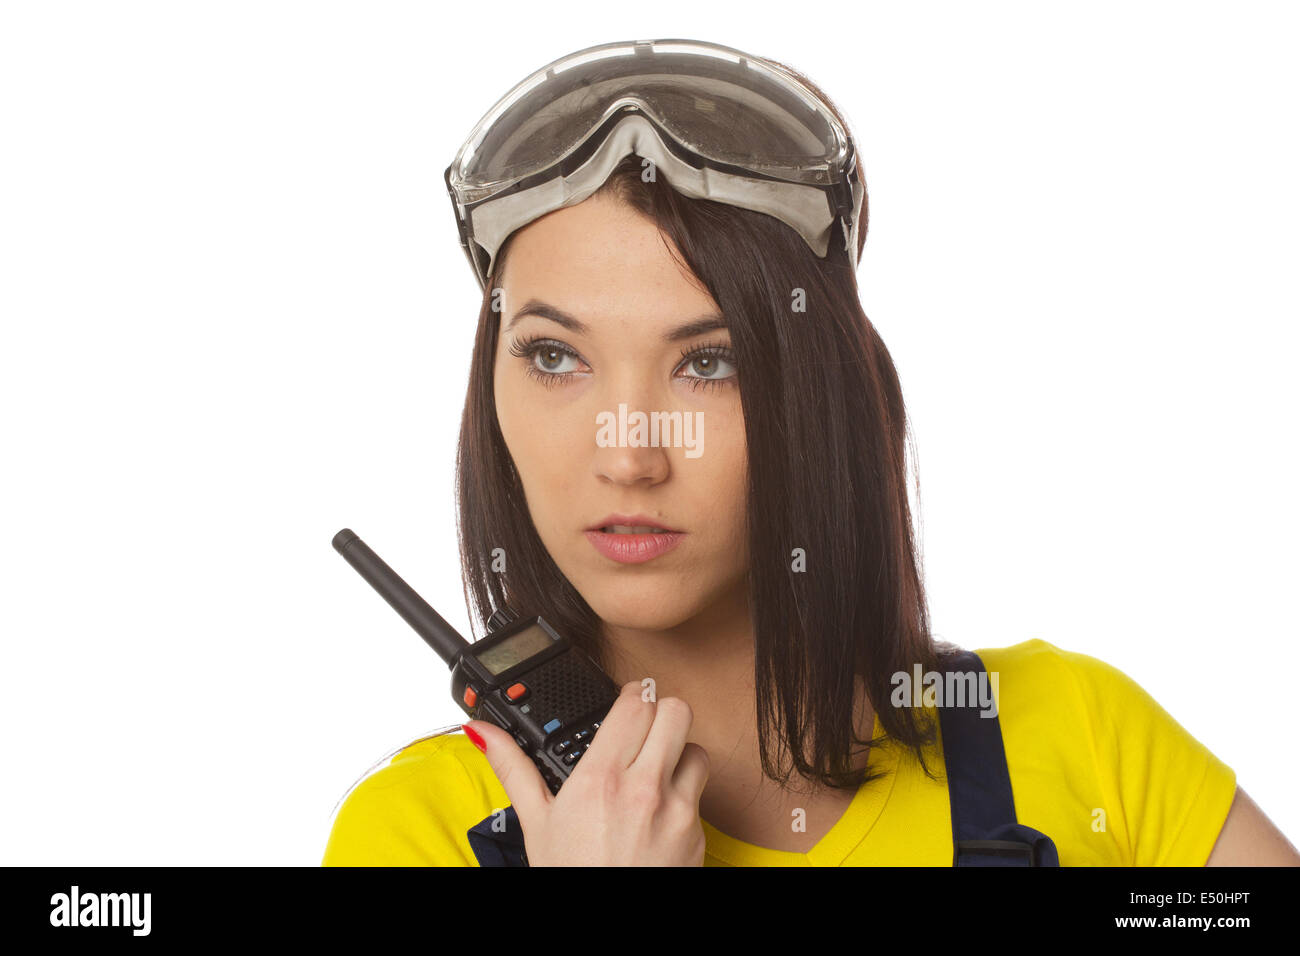 woman with walkie-talky Stock Photo